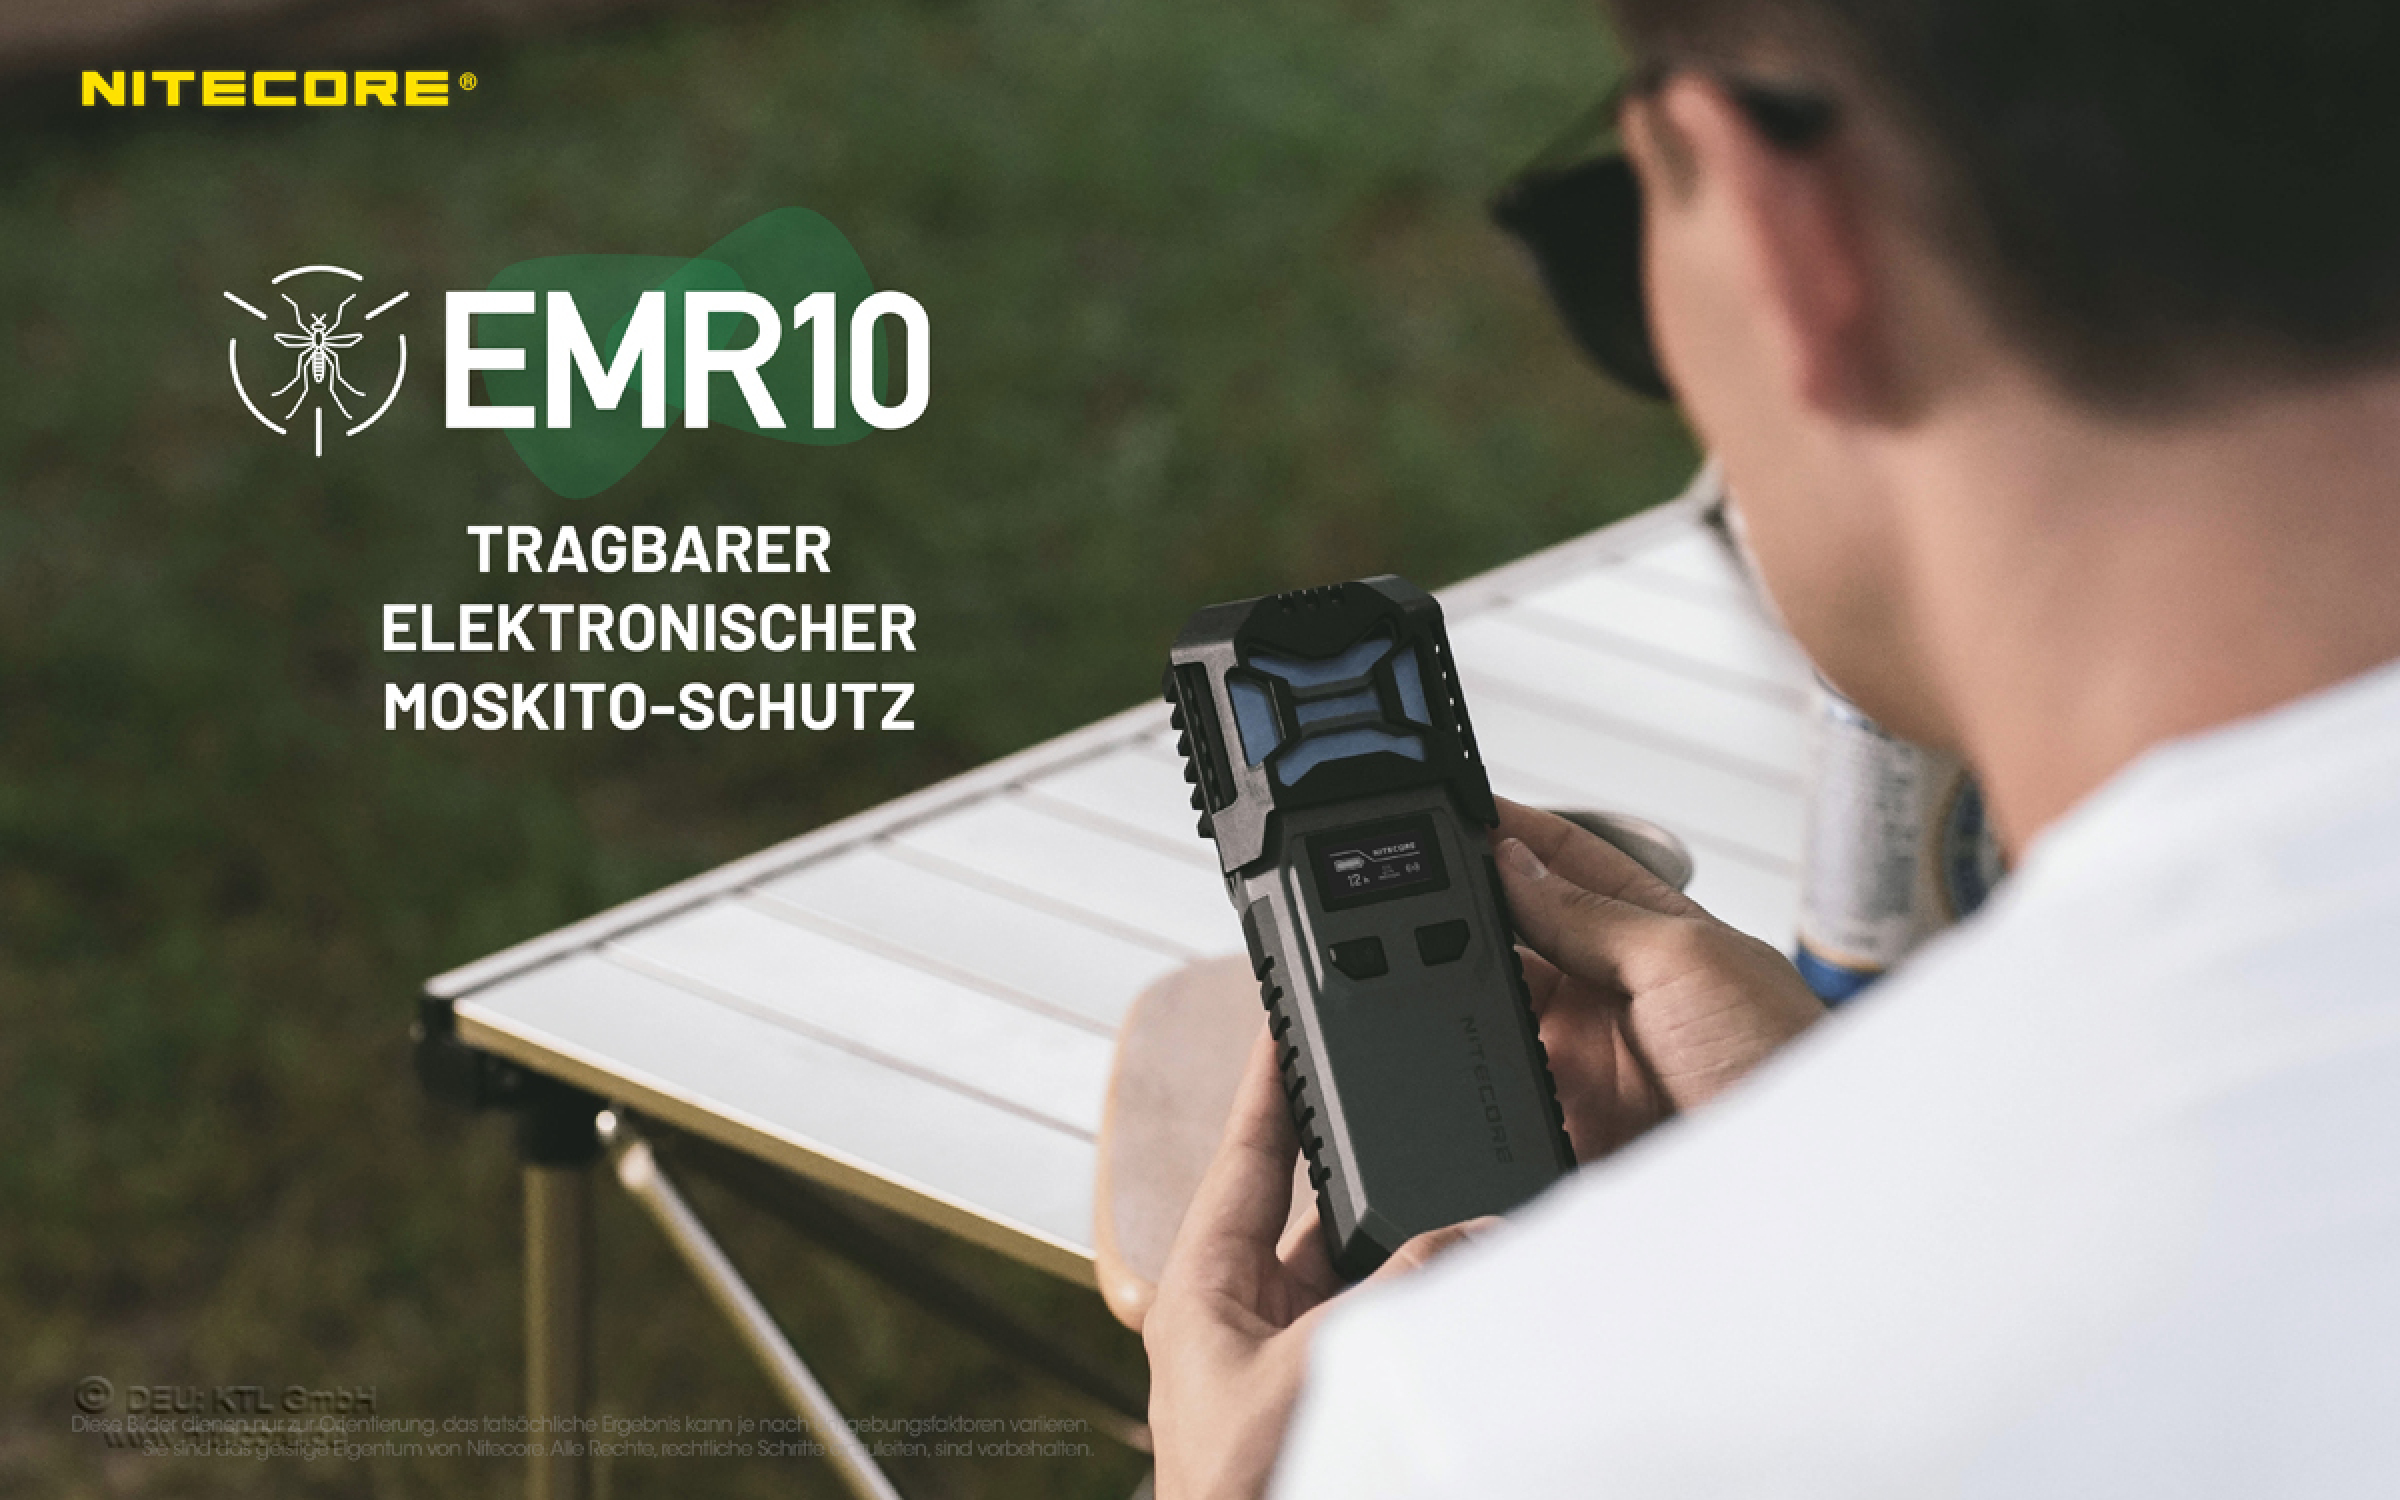 Nitecore EMR10 - mosquito repellent, incl. rechargeable batteries, power bank function